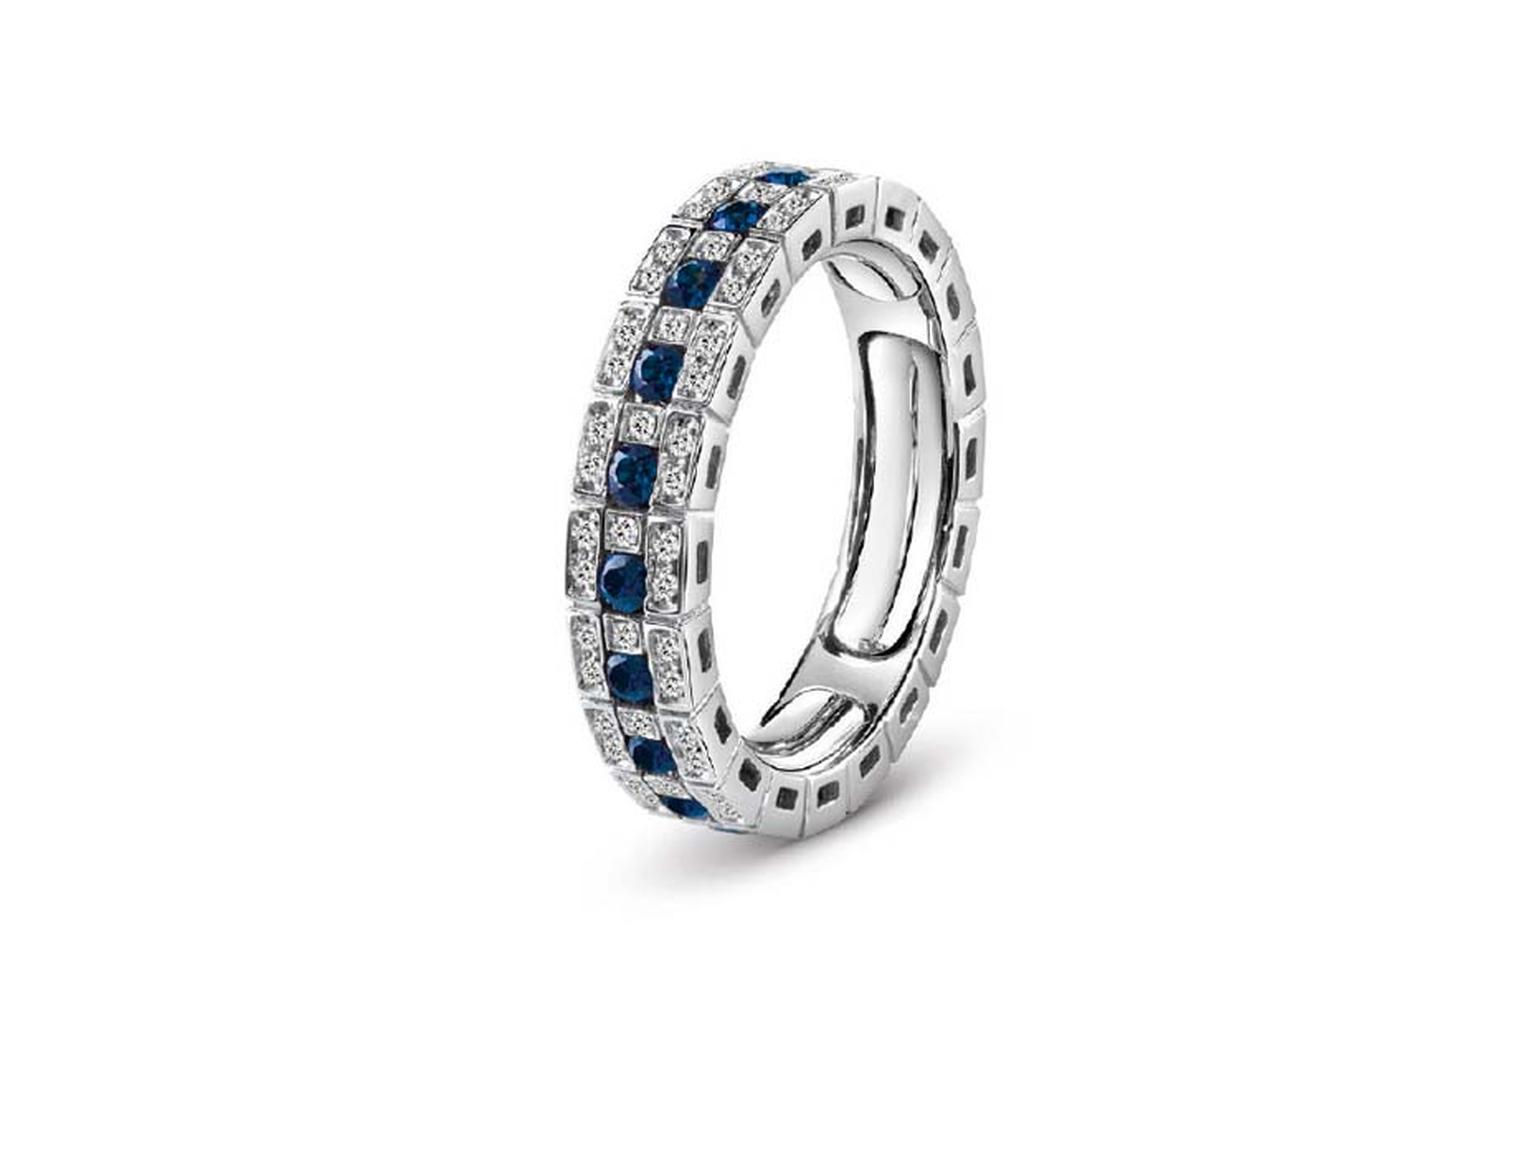 Damiani fine jewellery white gold ring with blue sapphires and diamonds.